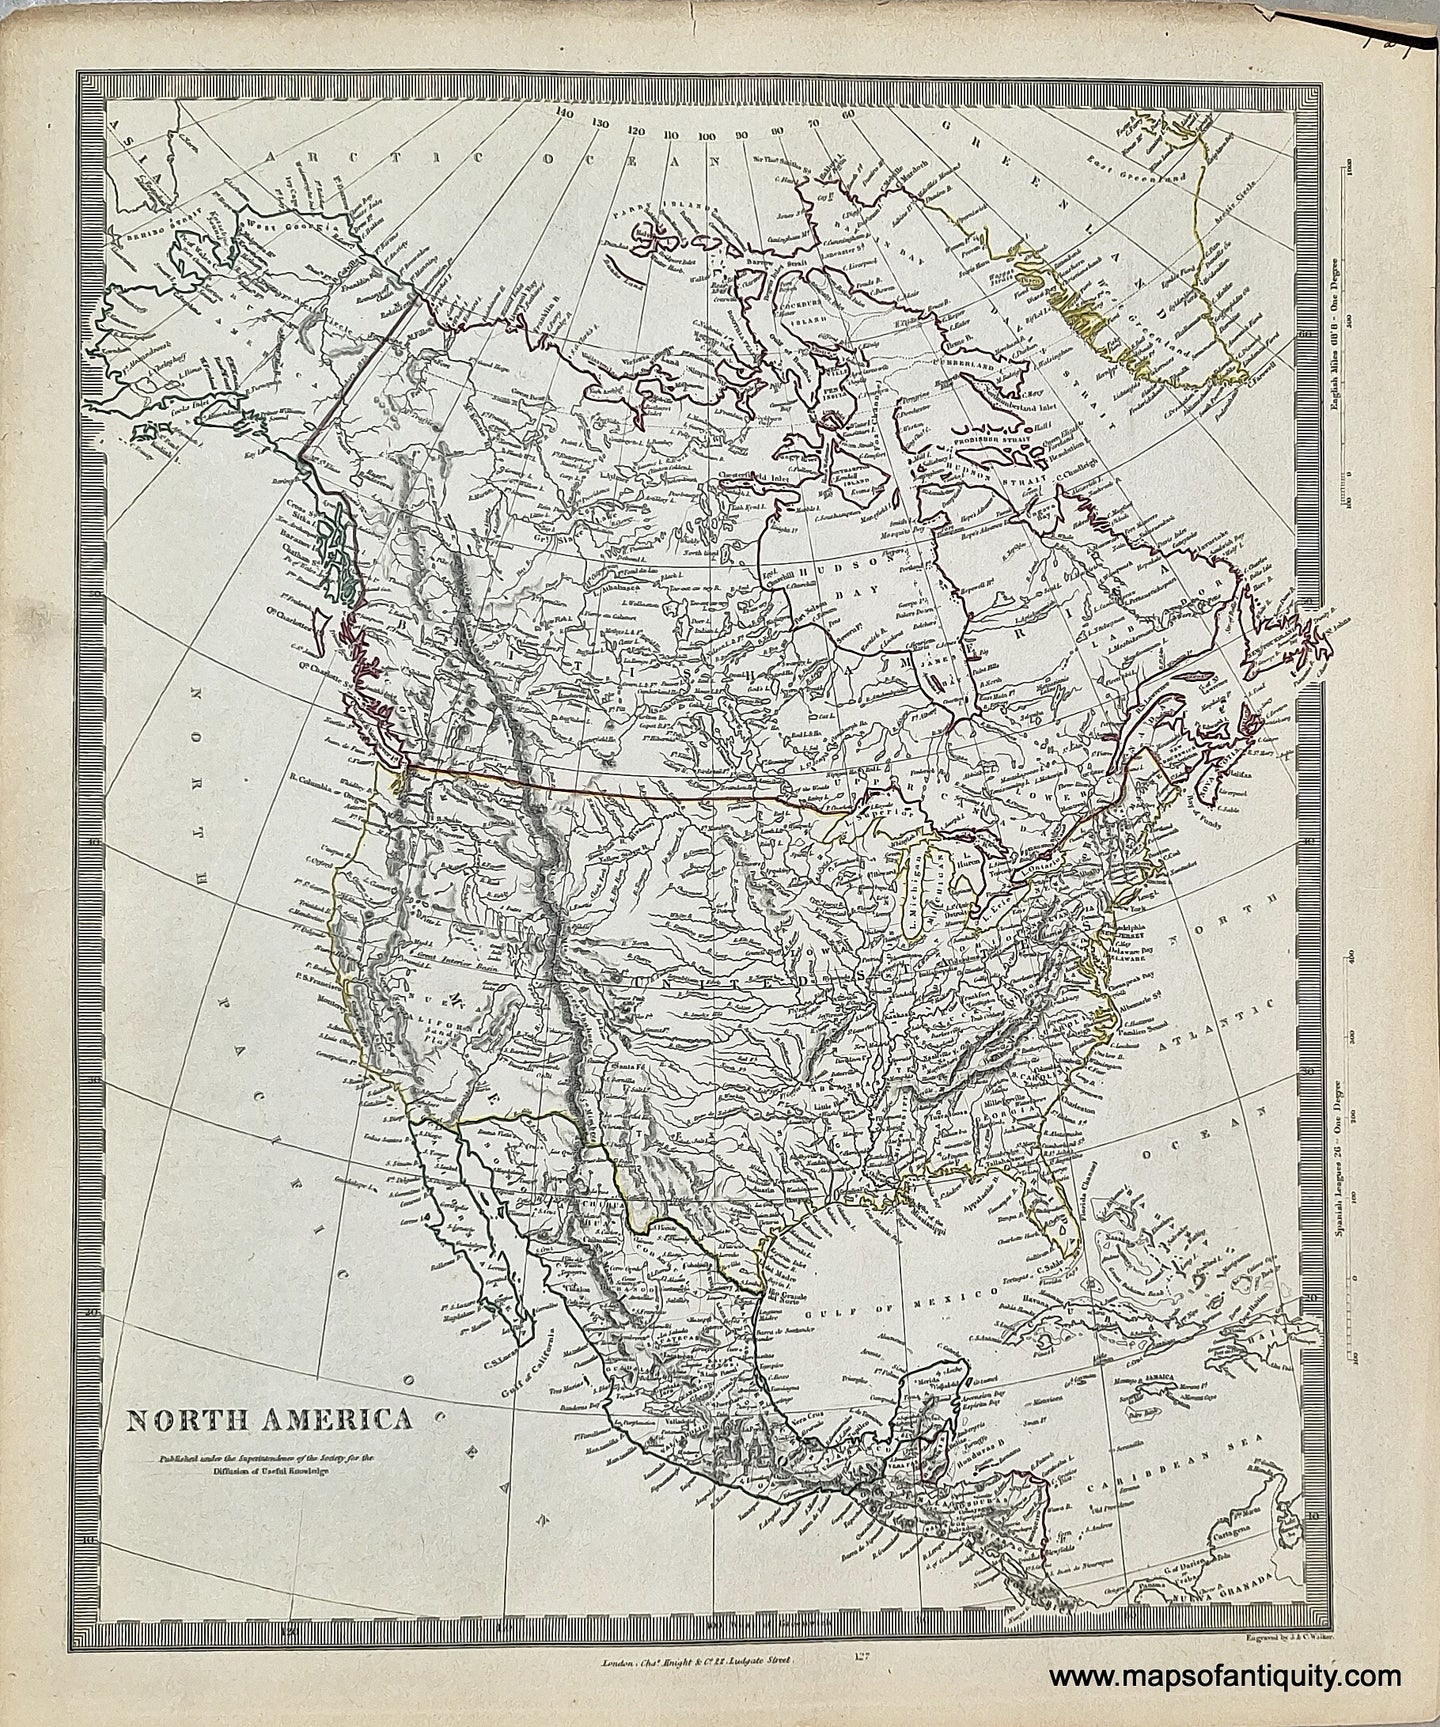 Antique-Hand-Colored-Map-North-America-SDUK-******-North-America-North-America-General-1850-SDUK/Society-for-the-Diffusion-of-Useful-Knowledge-Maps-Of-Antiquity